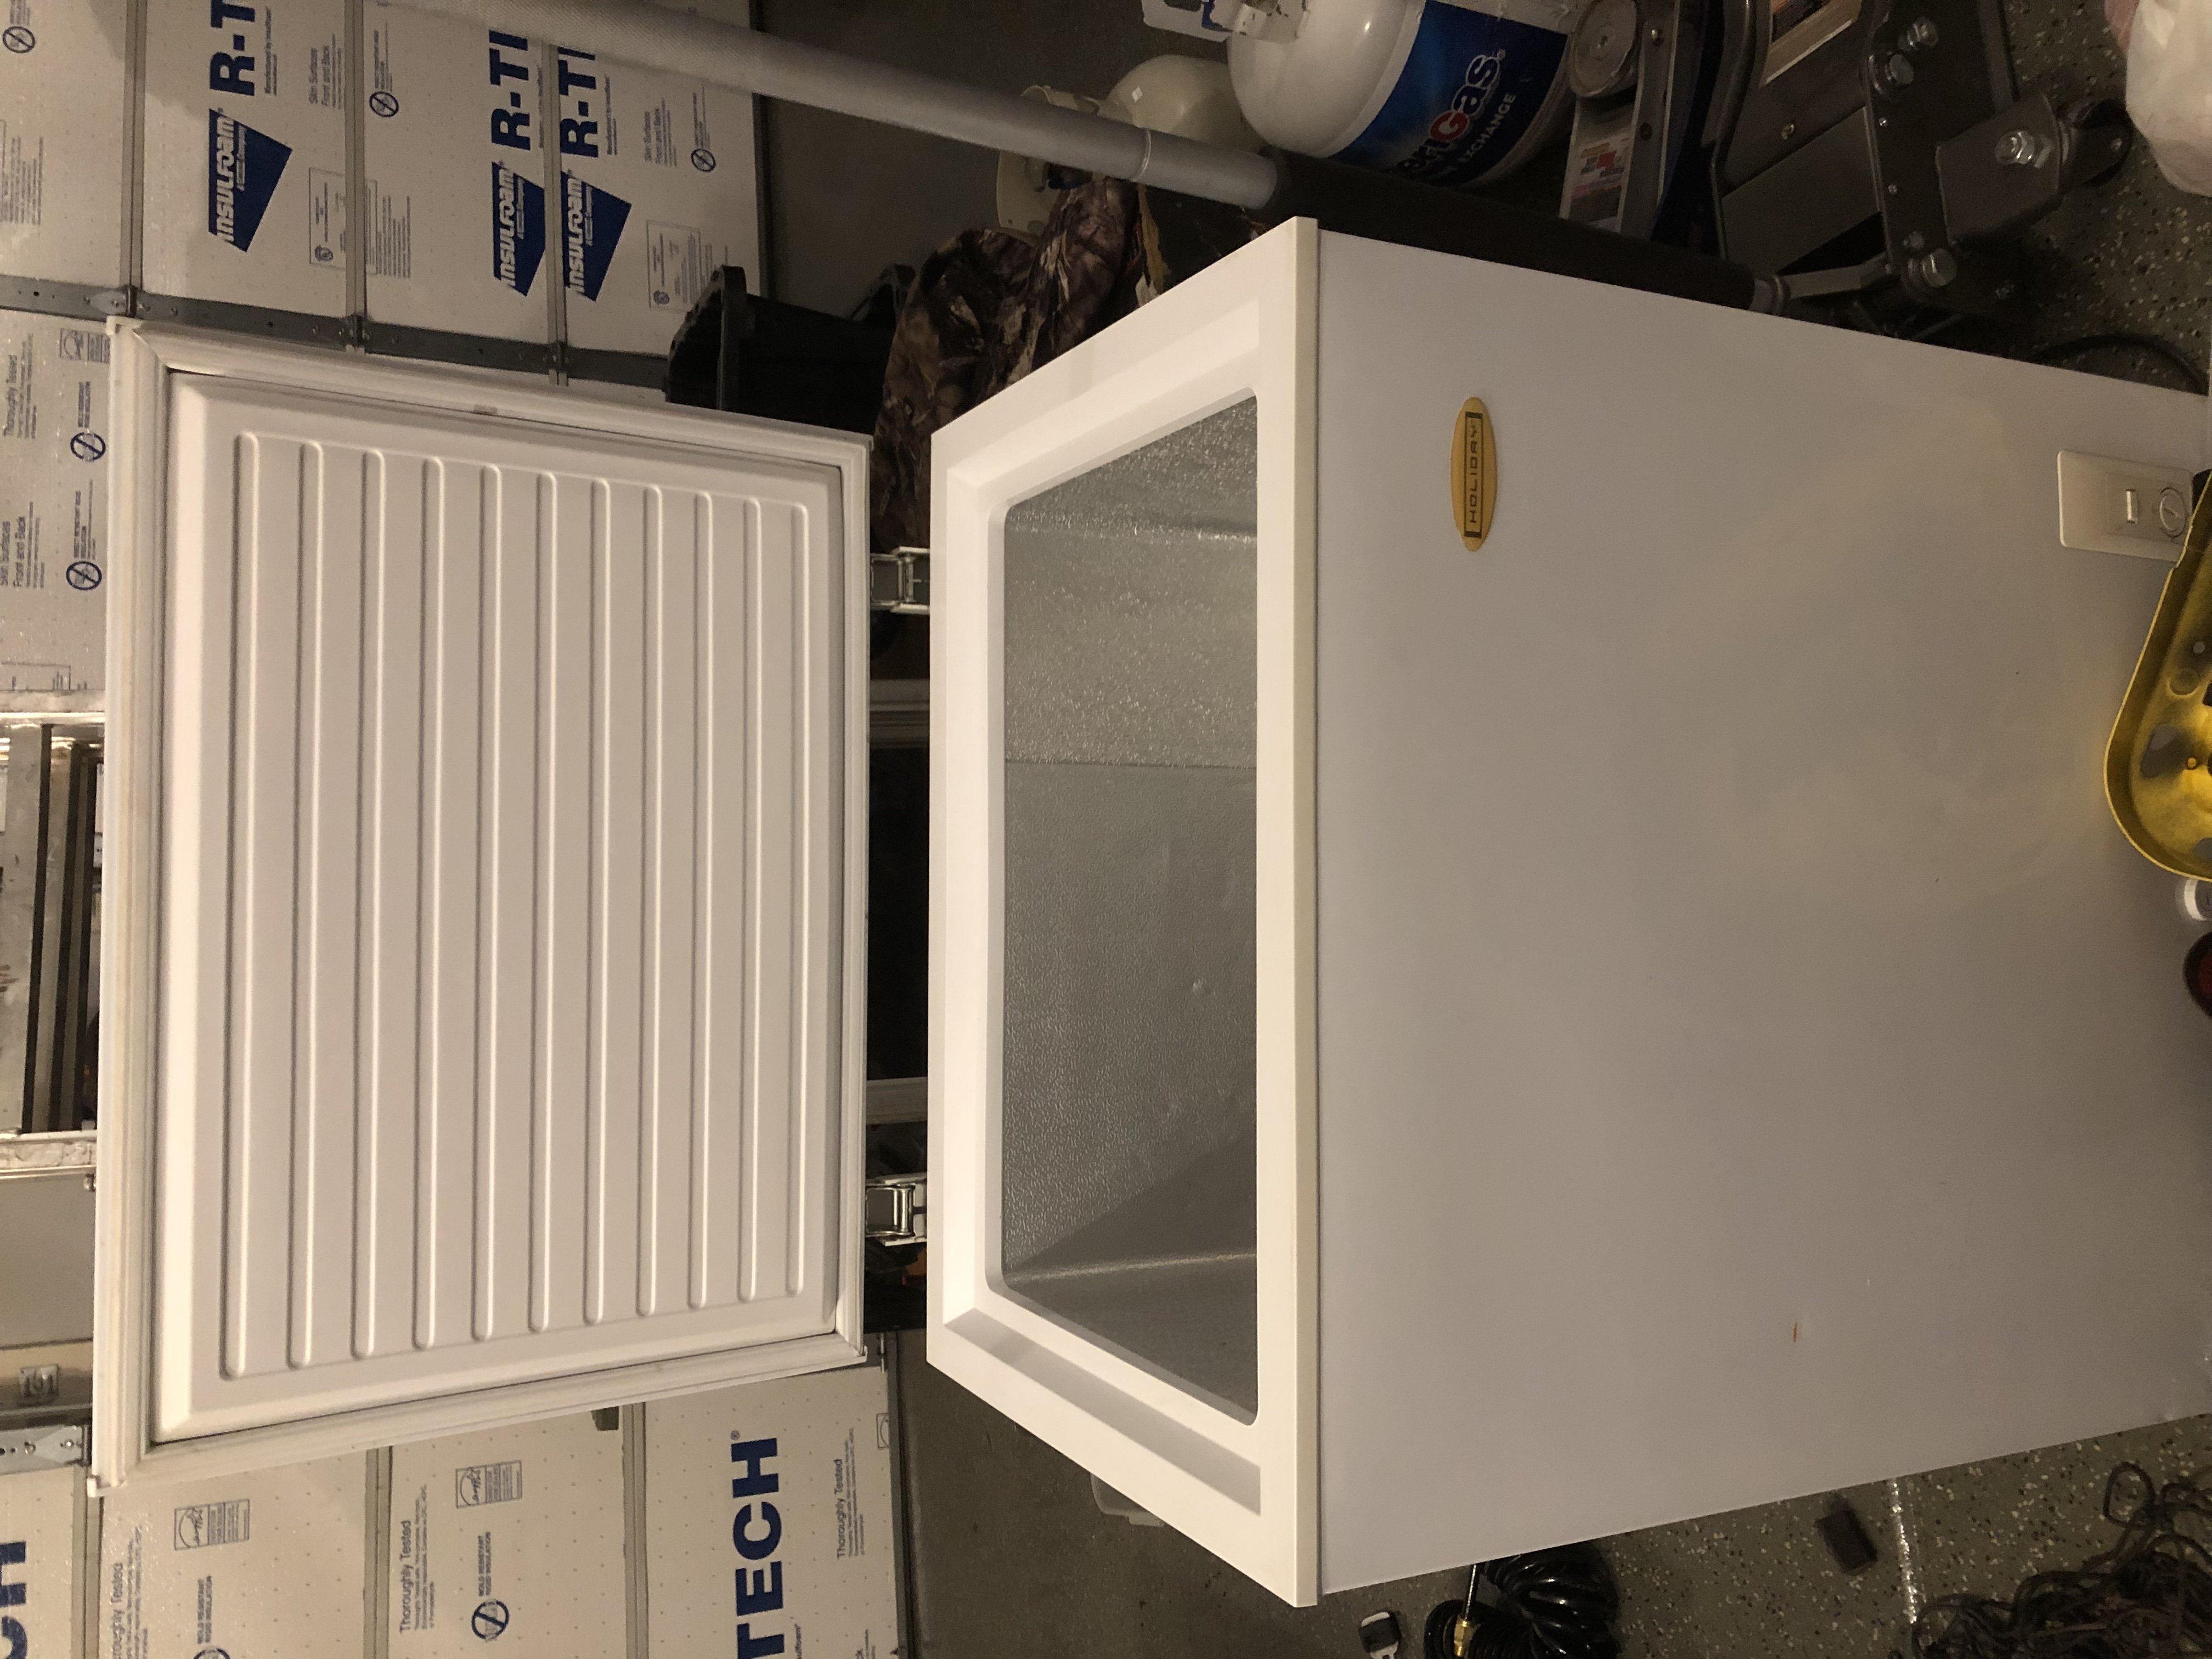 Holiday brand 5cf chest freezer - Classified Ads - CouesWhitetail.com